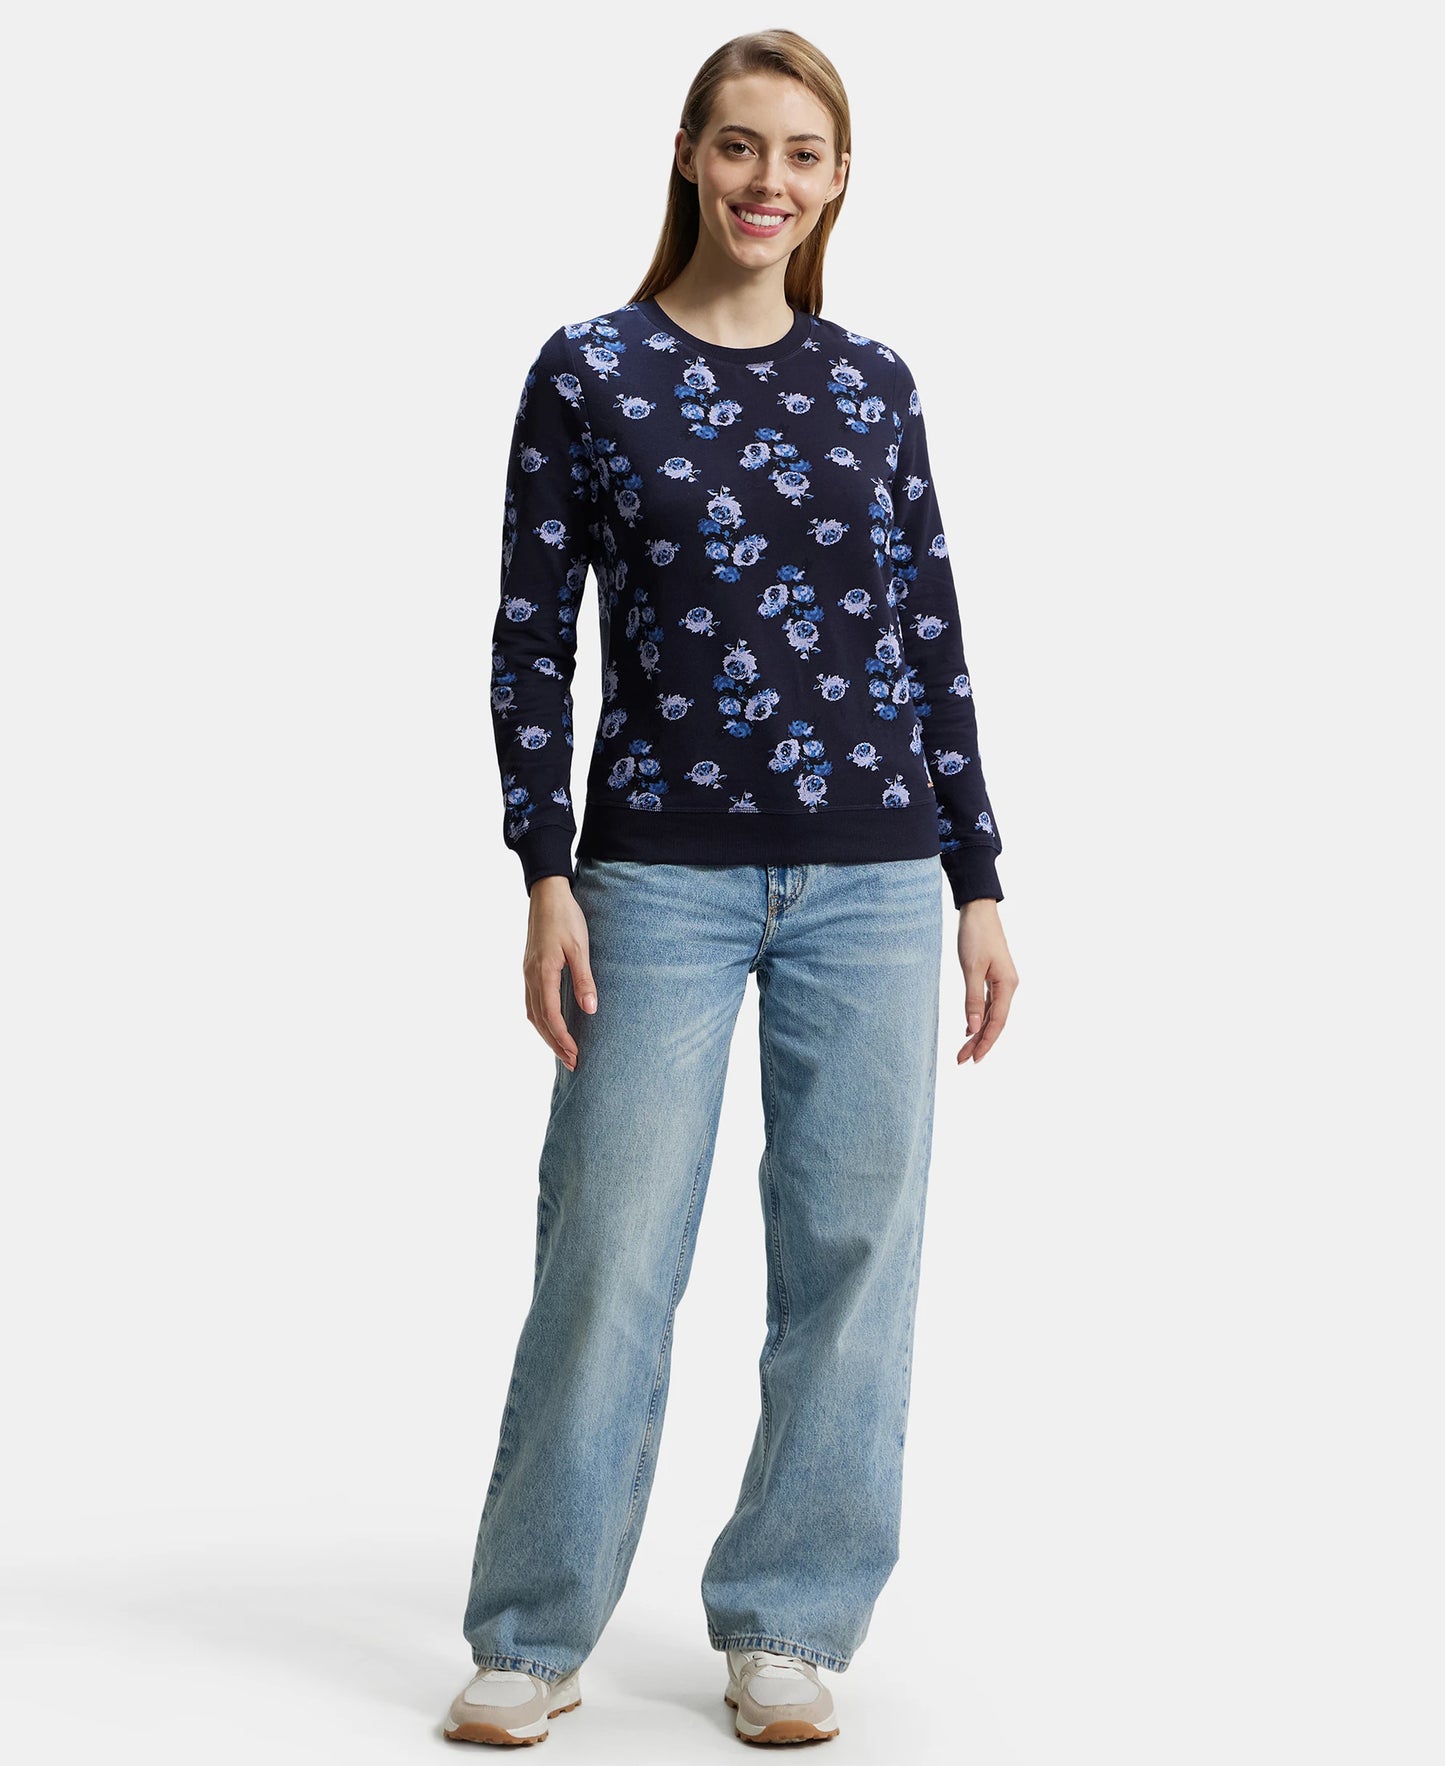 Super Combed Cotton Elastane Stretch French Terry Fabric Printed Sweatshirt with Ribbed Cuffs - Navy Blazer-6